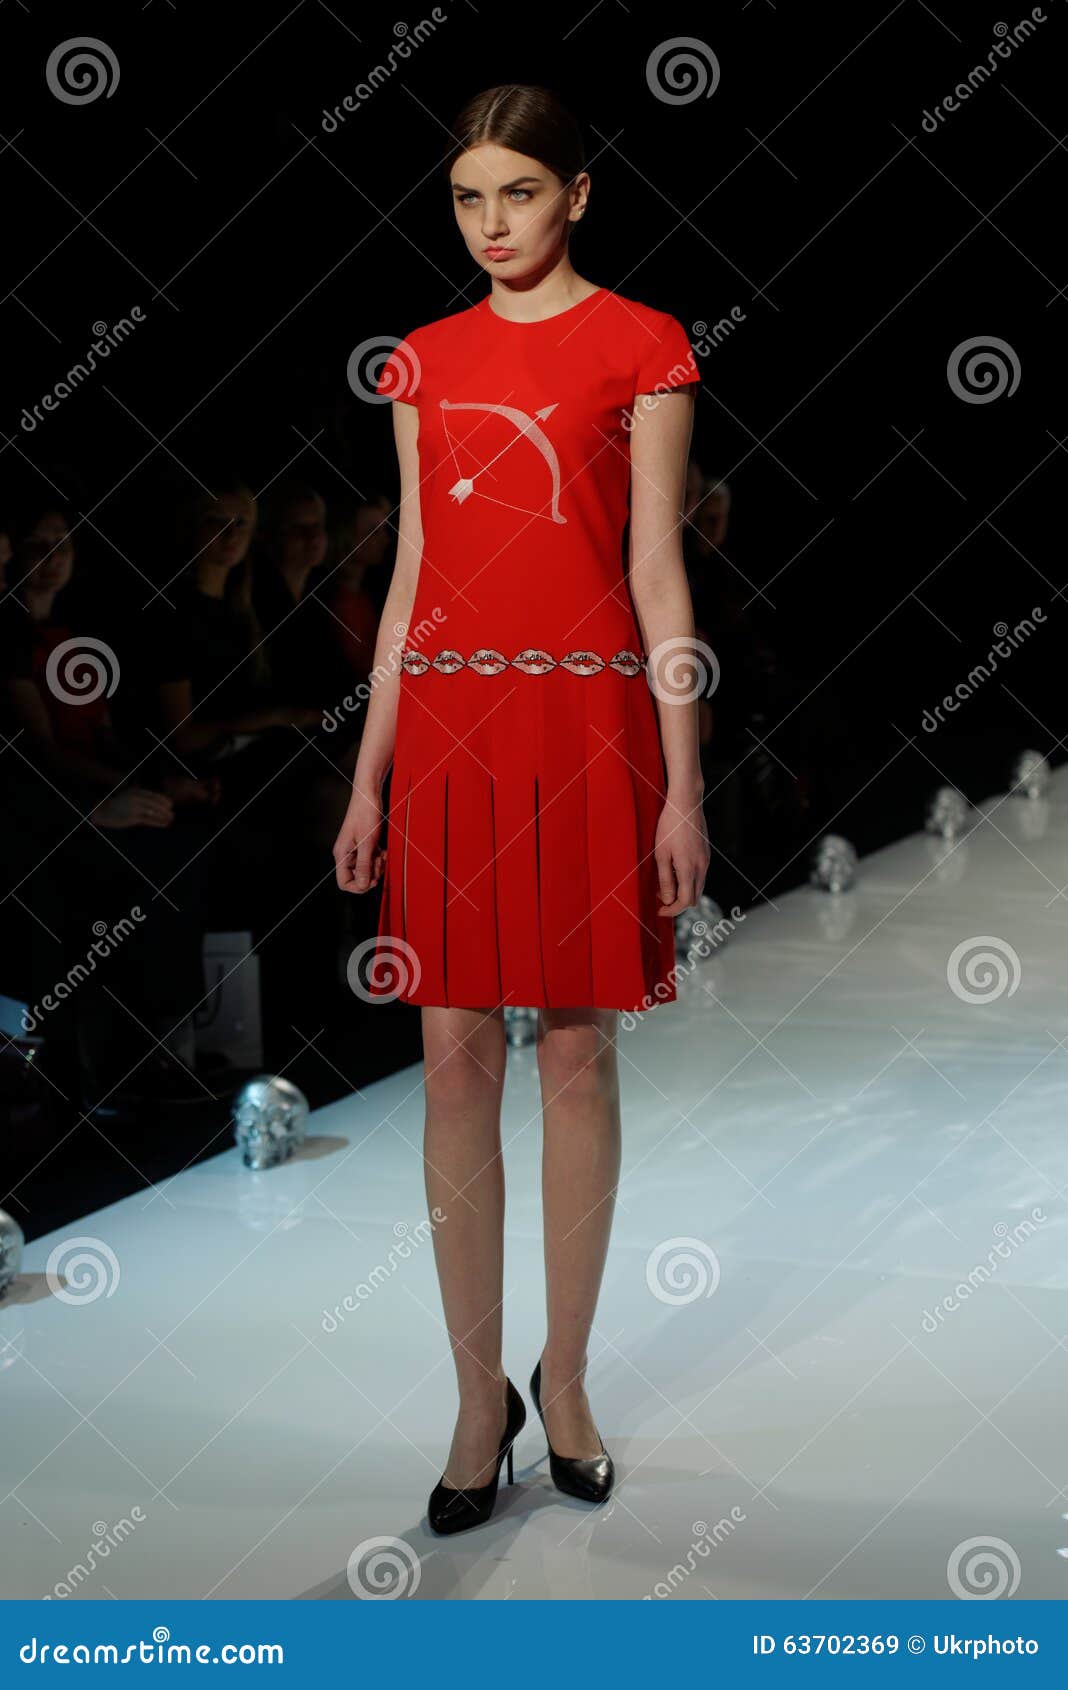 St. Petersburg Fashion Week Overview 2015 Editorial Stock Image - Image ...